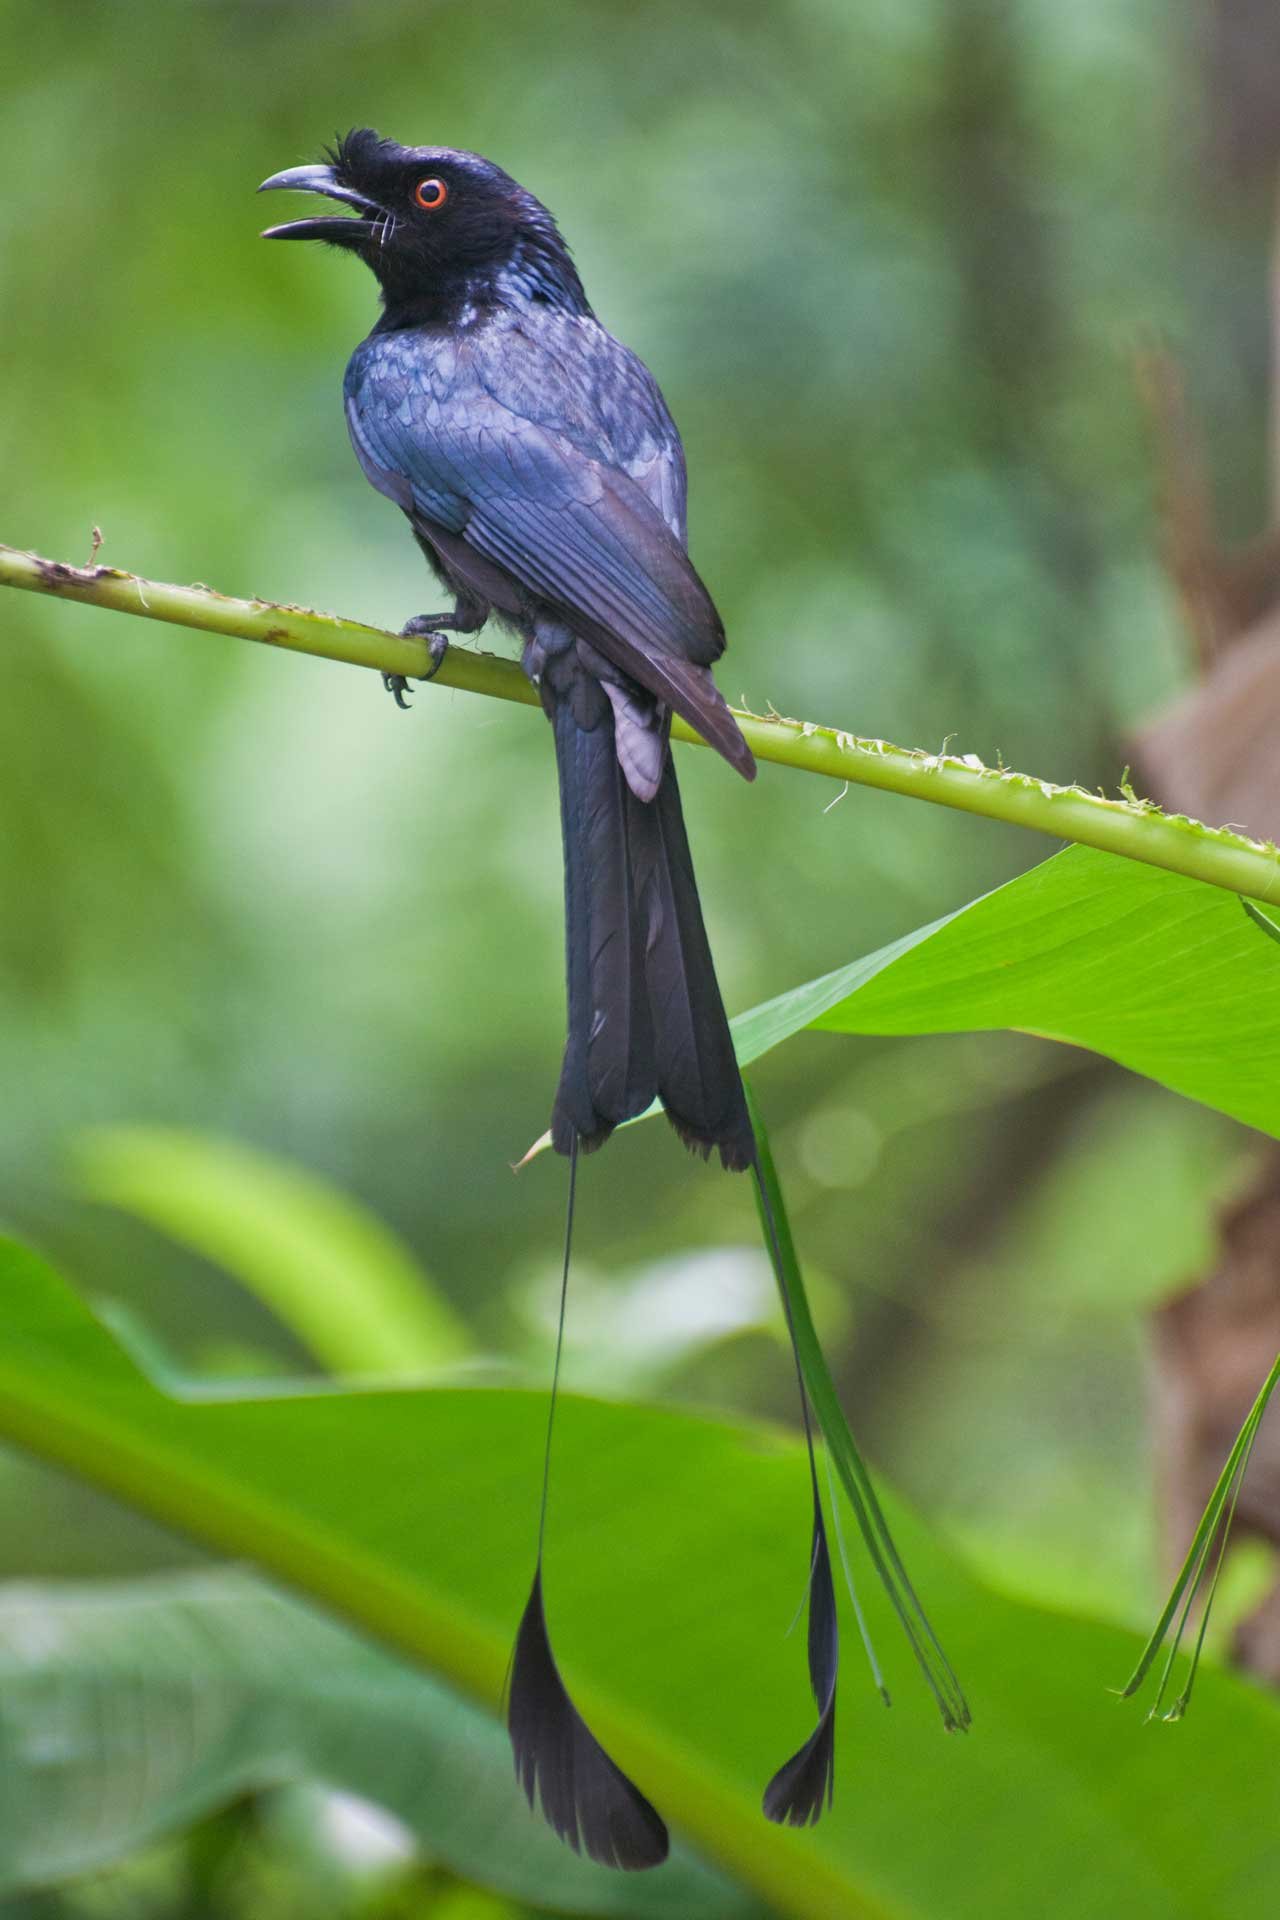 Racket Tailed Drongo, a medium sized black tropical forest bird with bright orange eyes and a long tail with extended outer feathers commonly seen in the gardens at villa oriole phuket free photo download